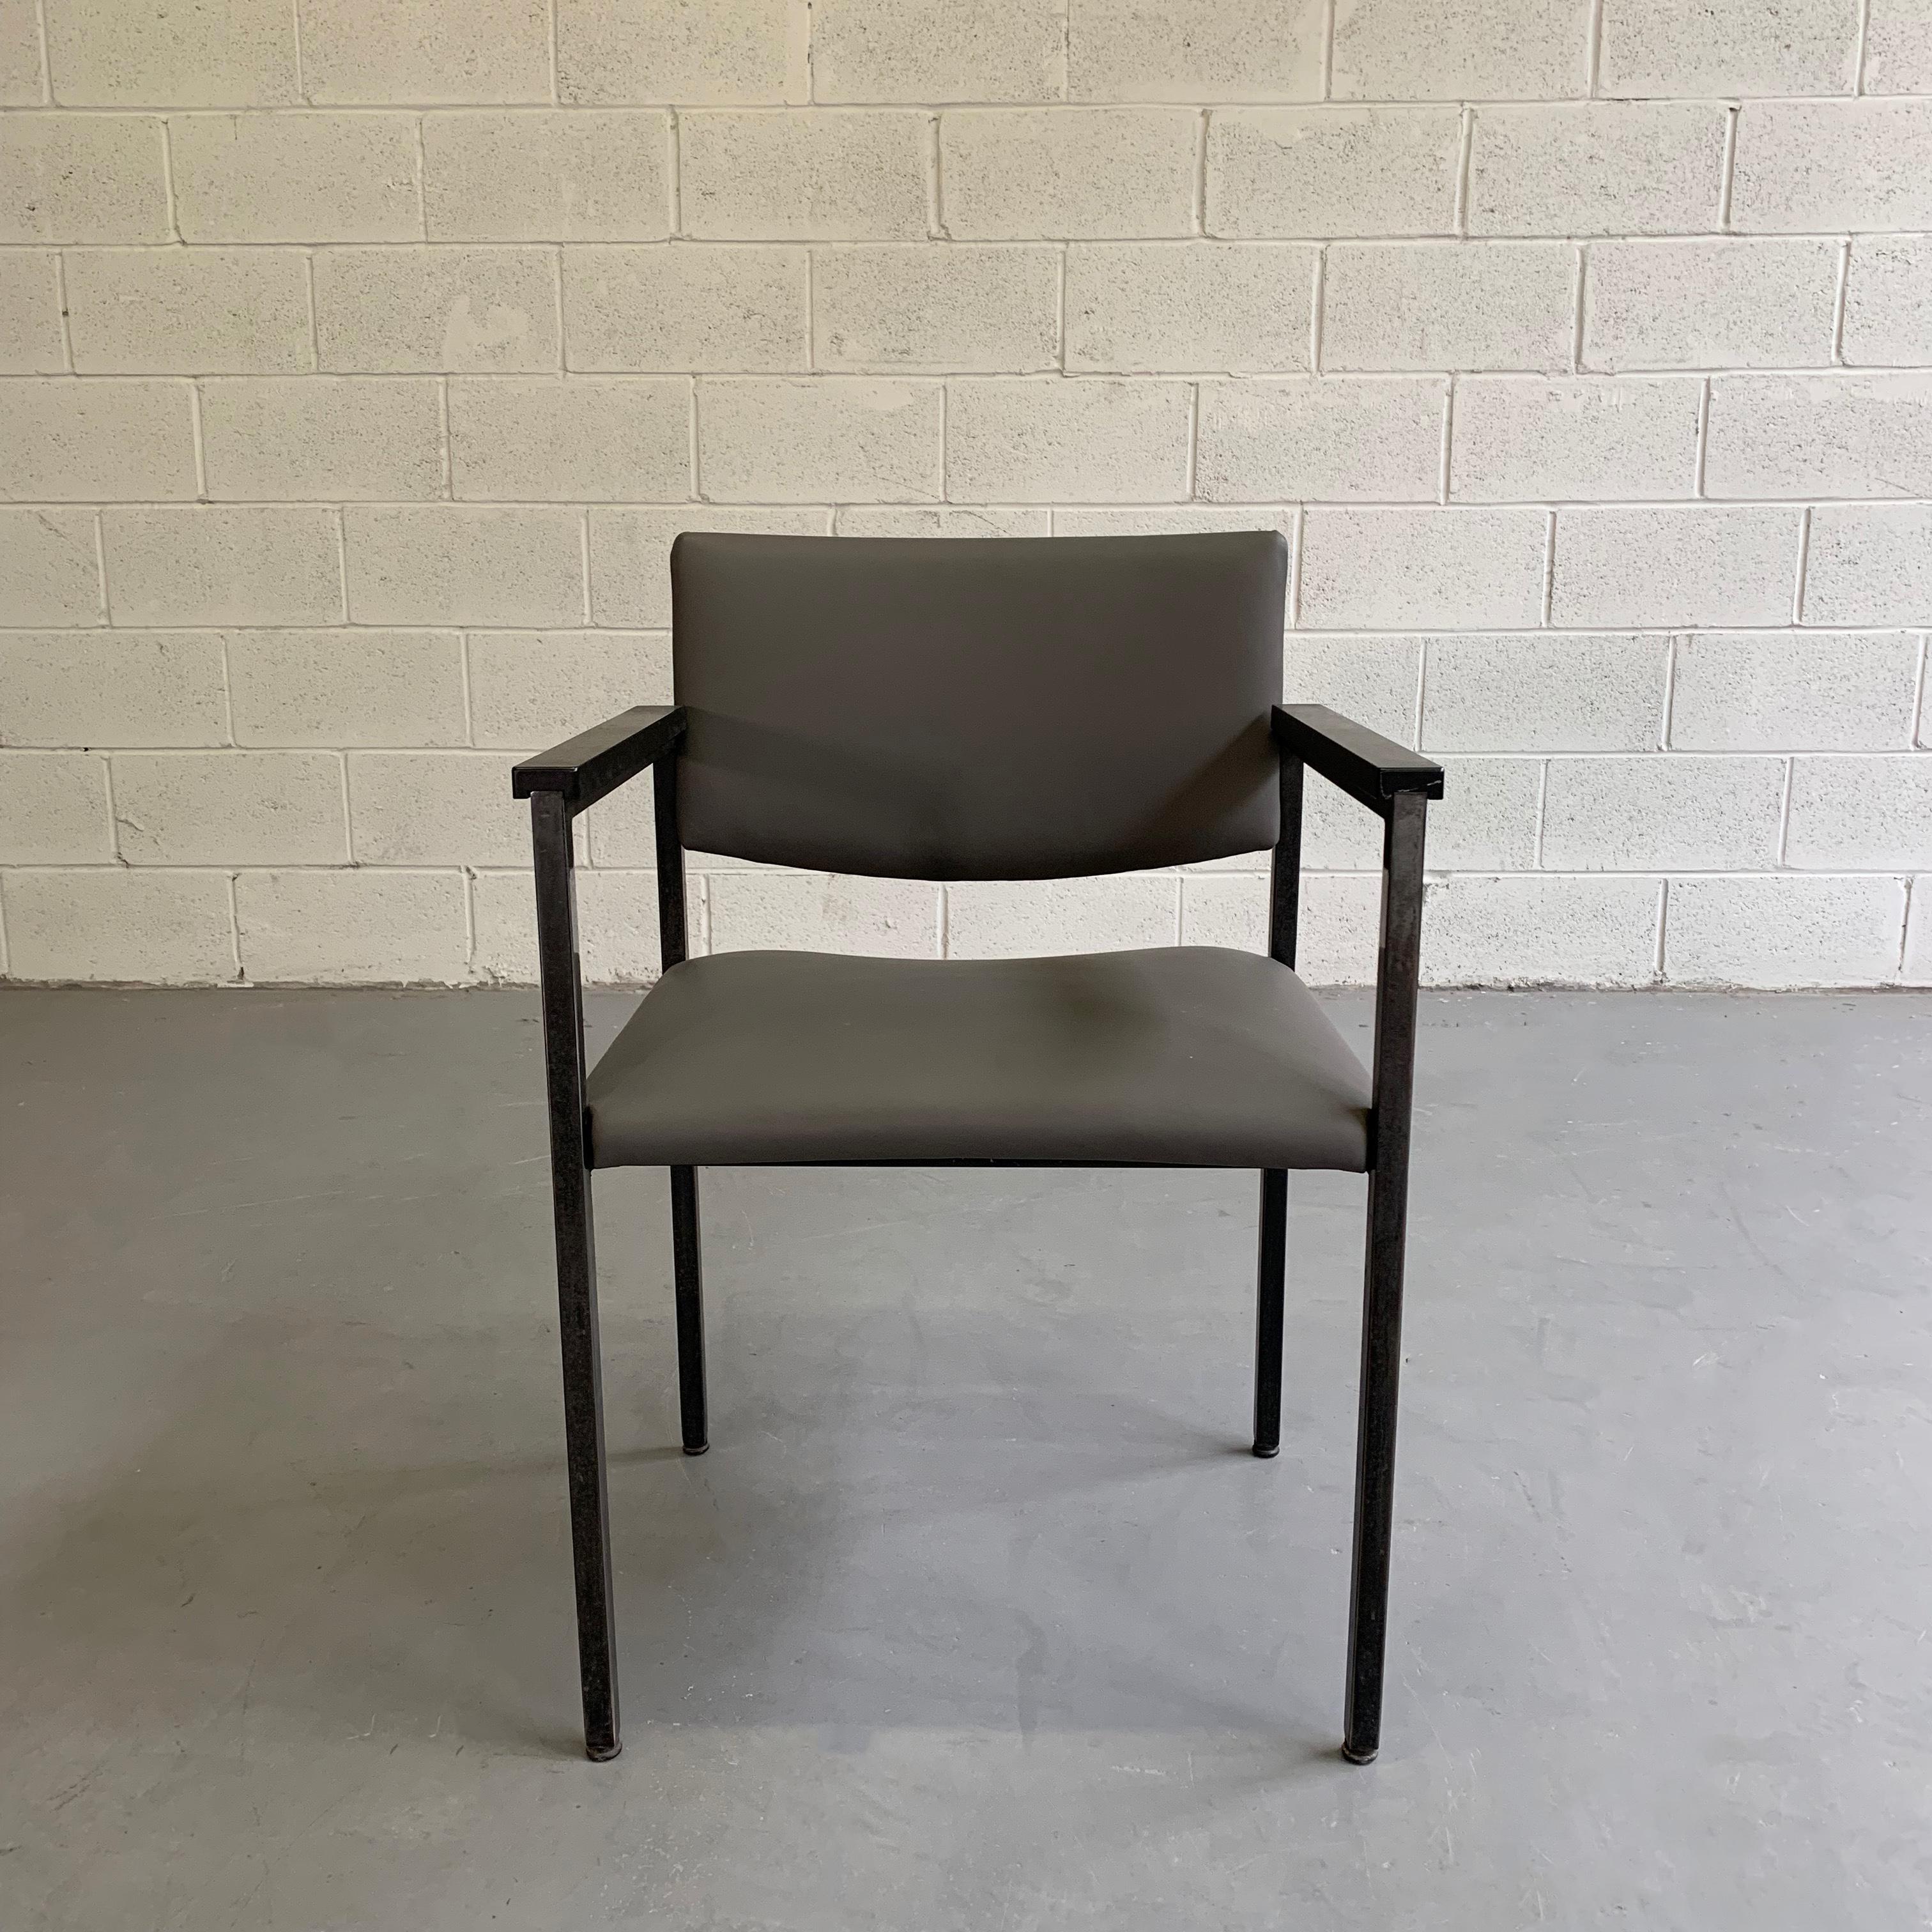 American Mid-Century Modern Steel Frame Leather Armchair For Sale